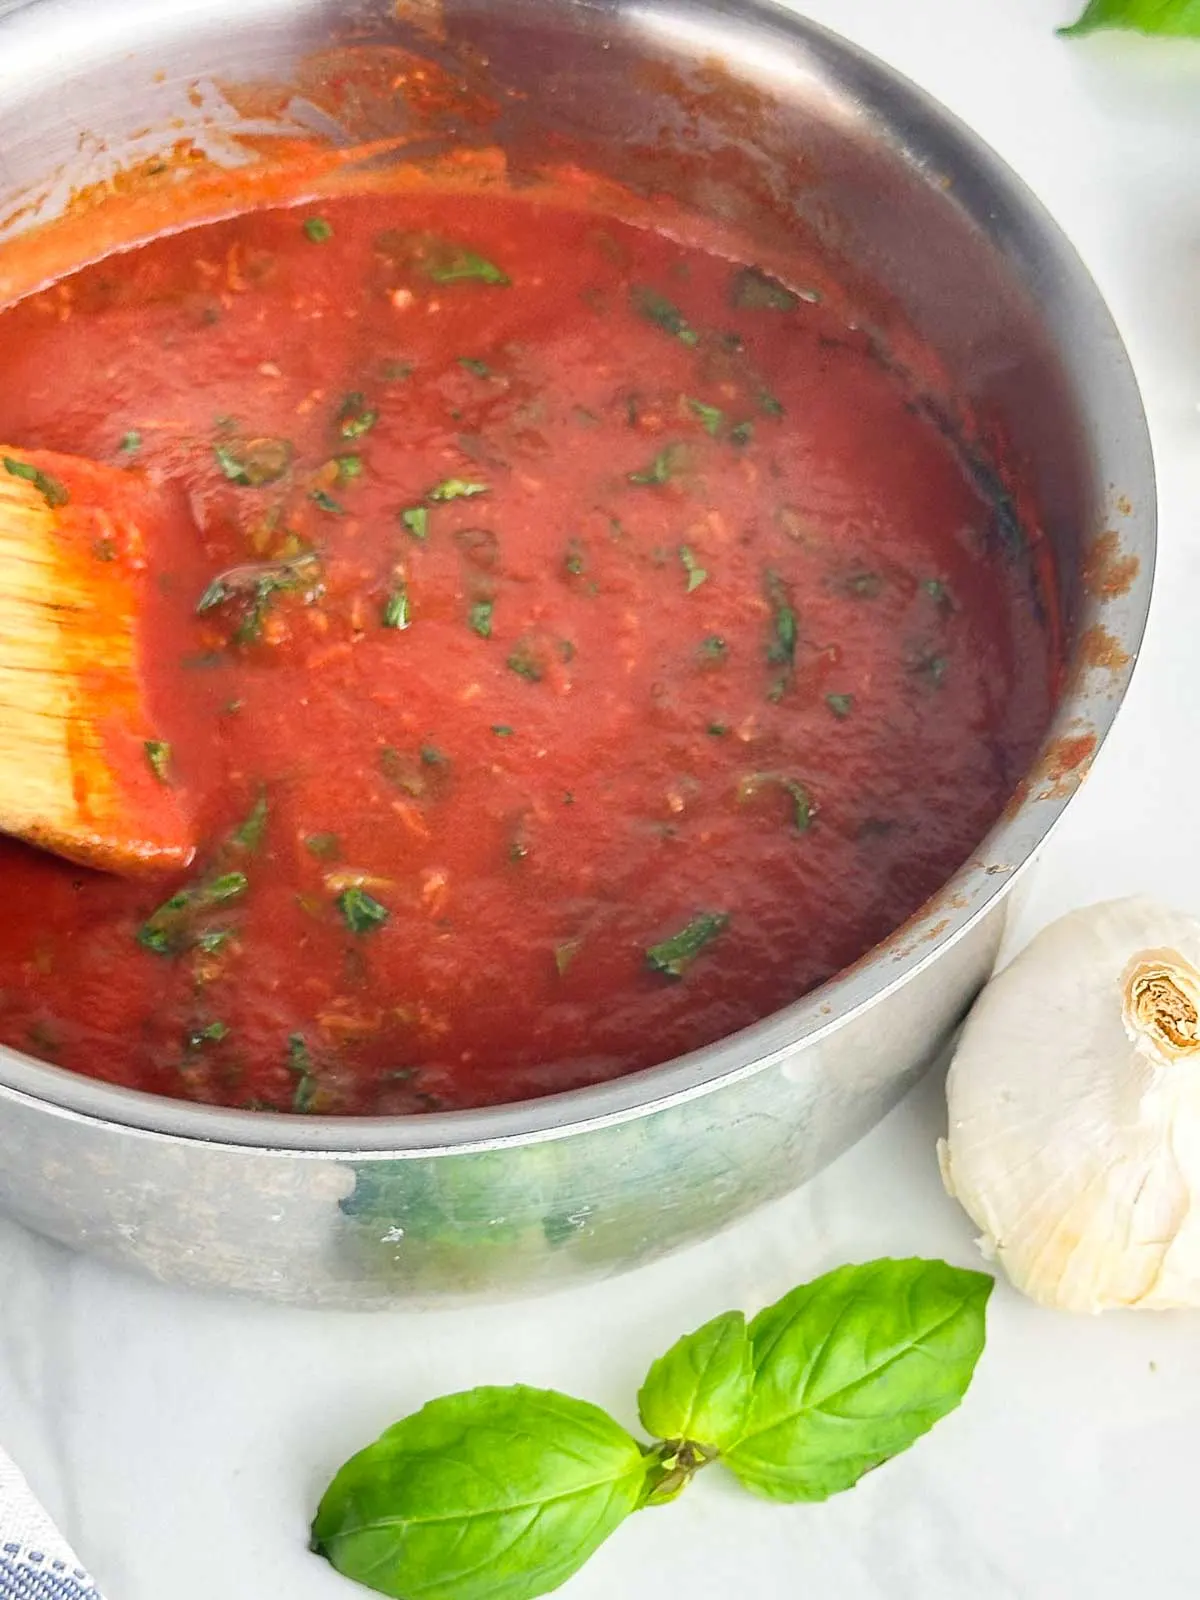 A pot of real Italian tomato sauce with basil ready to be spooned over spaghetti, meatballs, or anything else you can think of!